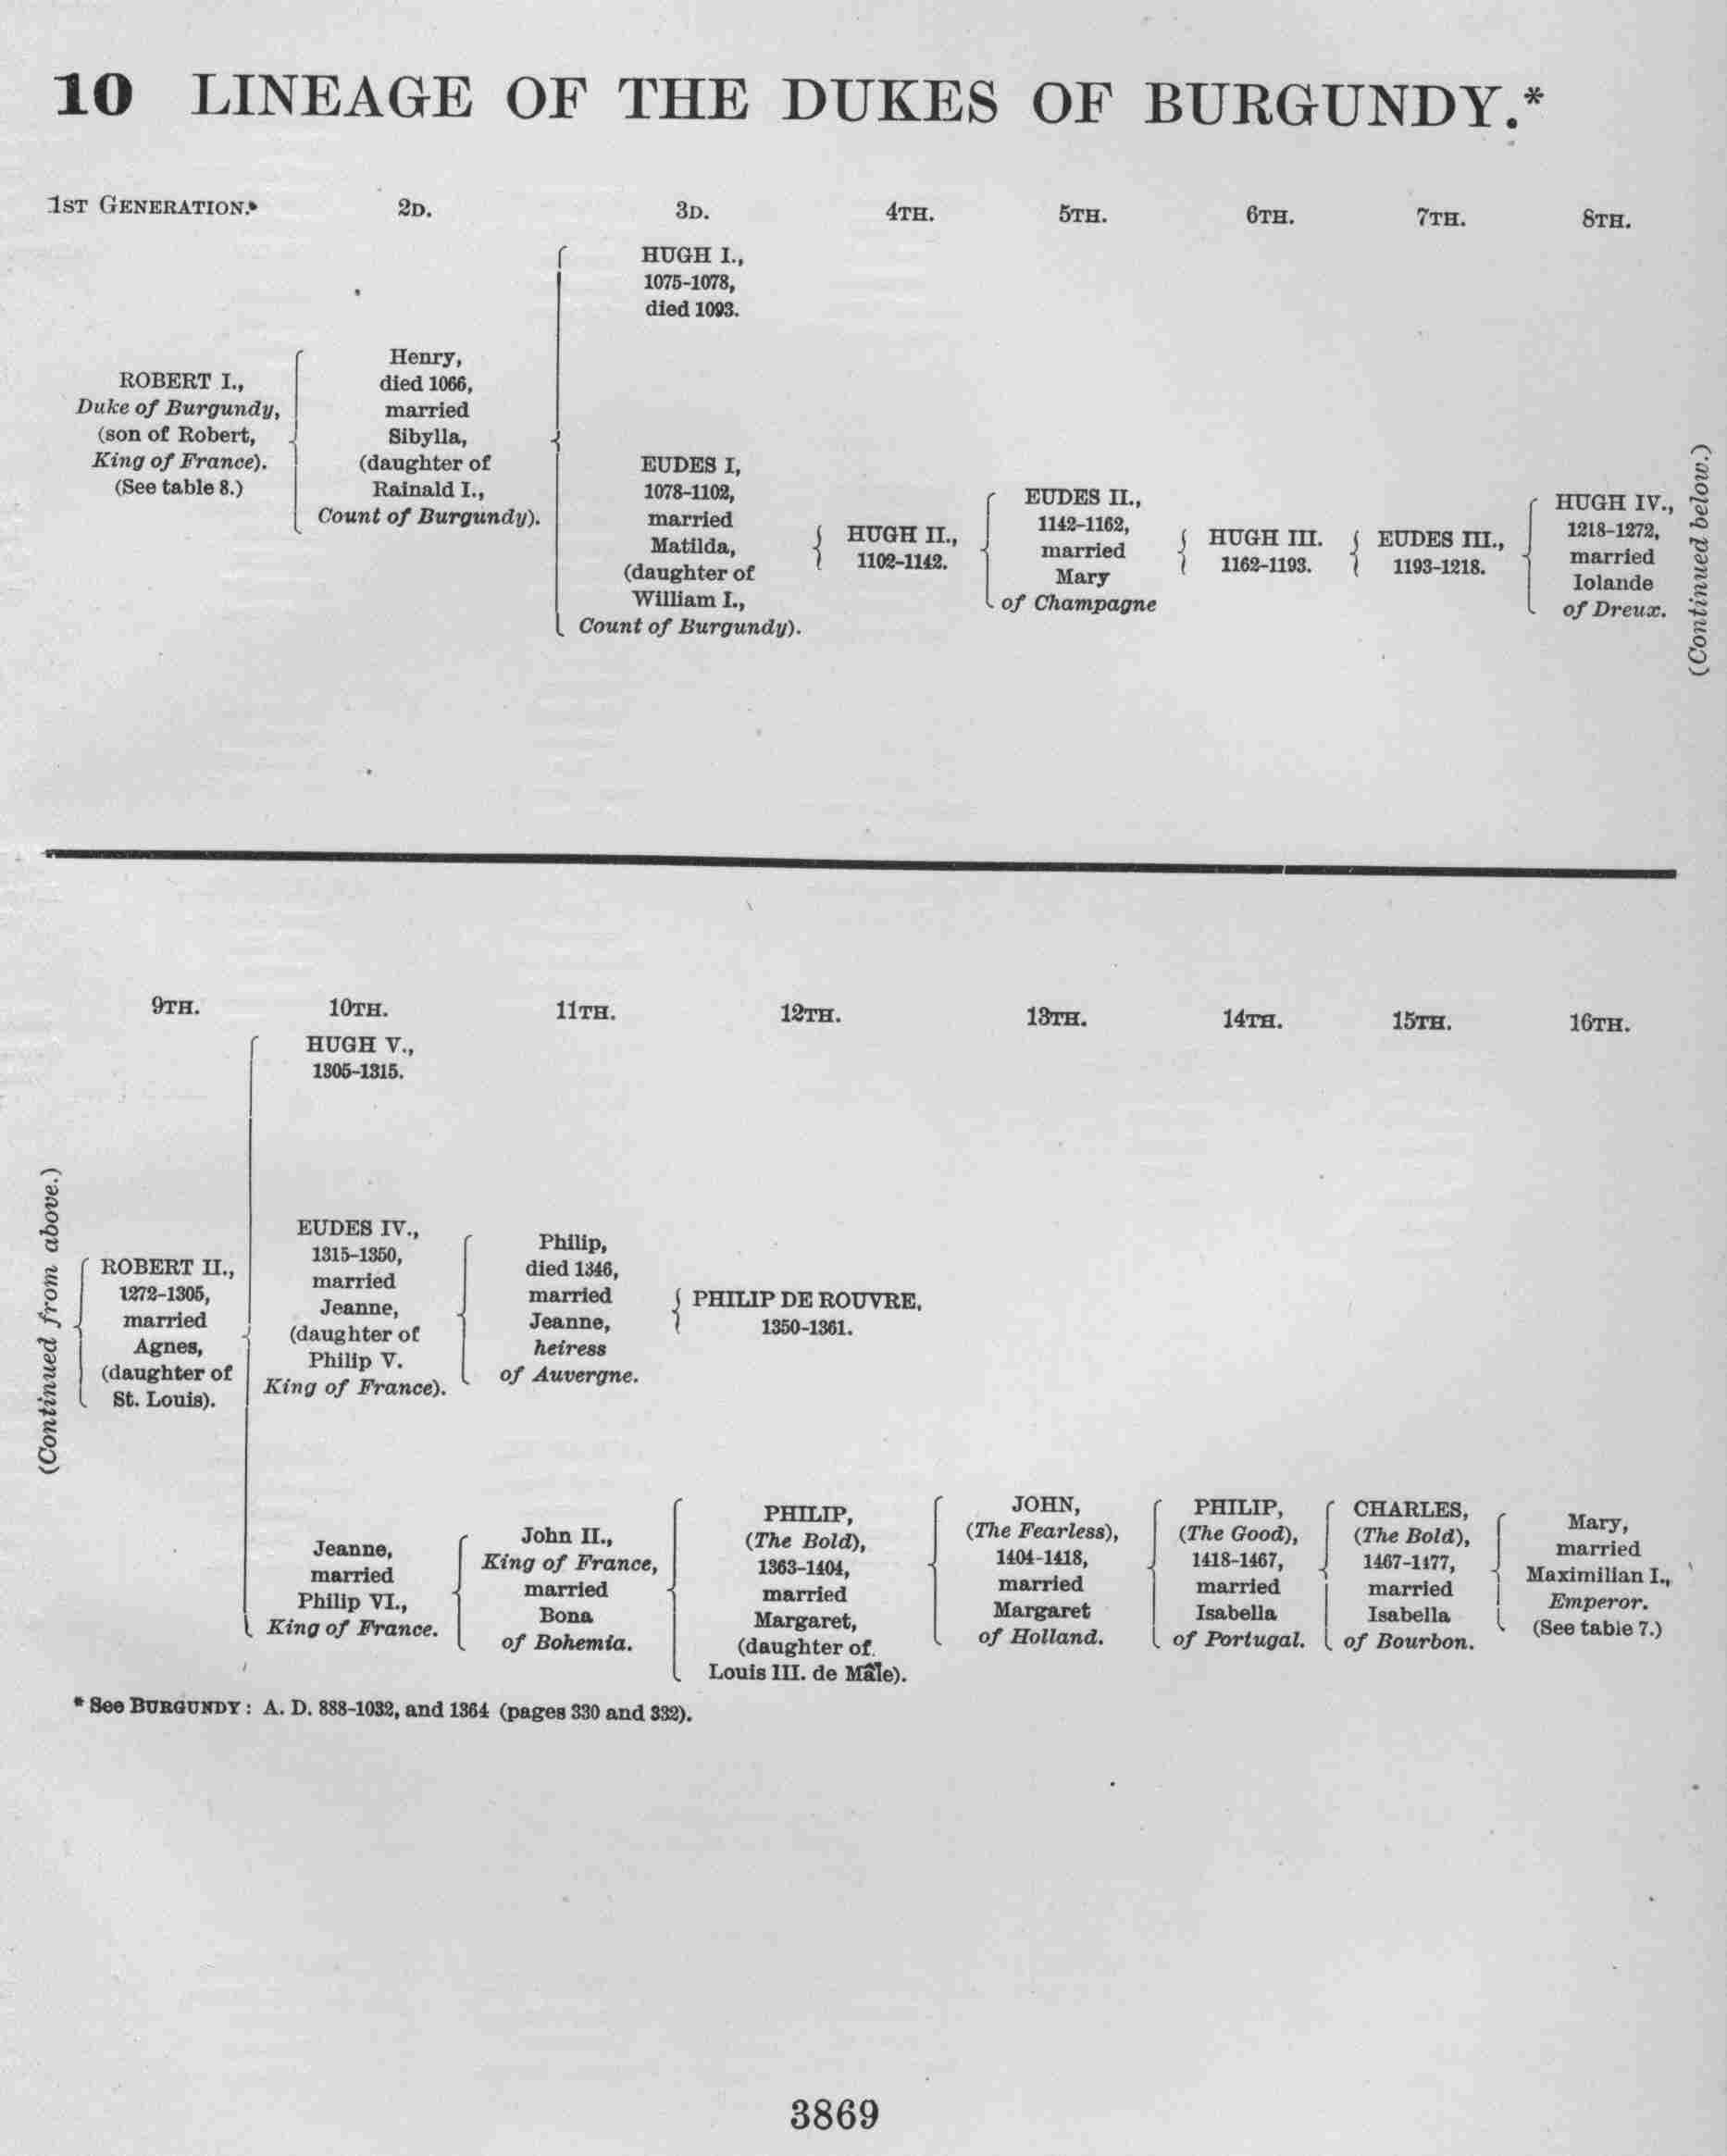 LINEAGE OF THE DUKES OF BURGUNDY.